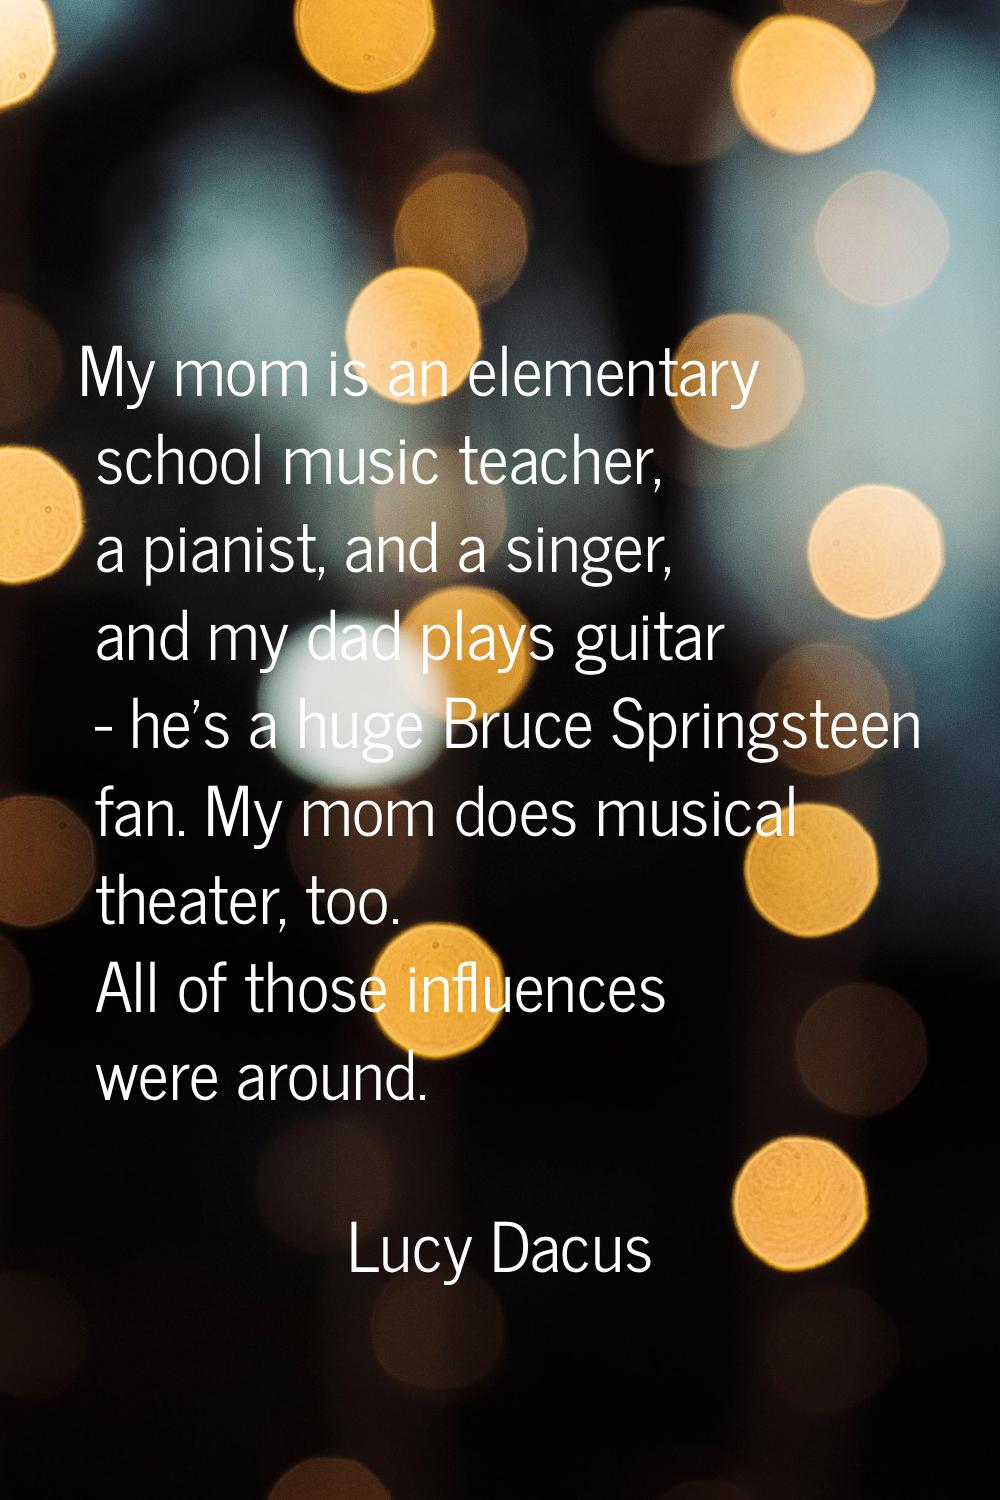 My mom is an elementary school music teacher, a pianist, and a singer, and my dad plays guitar - he